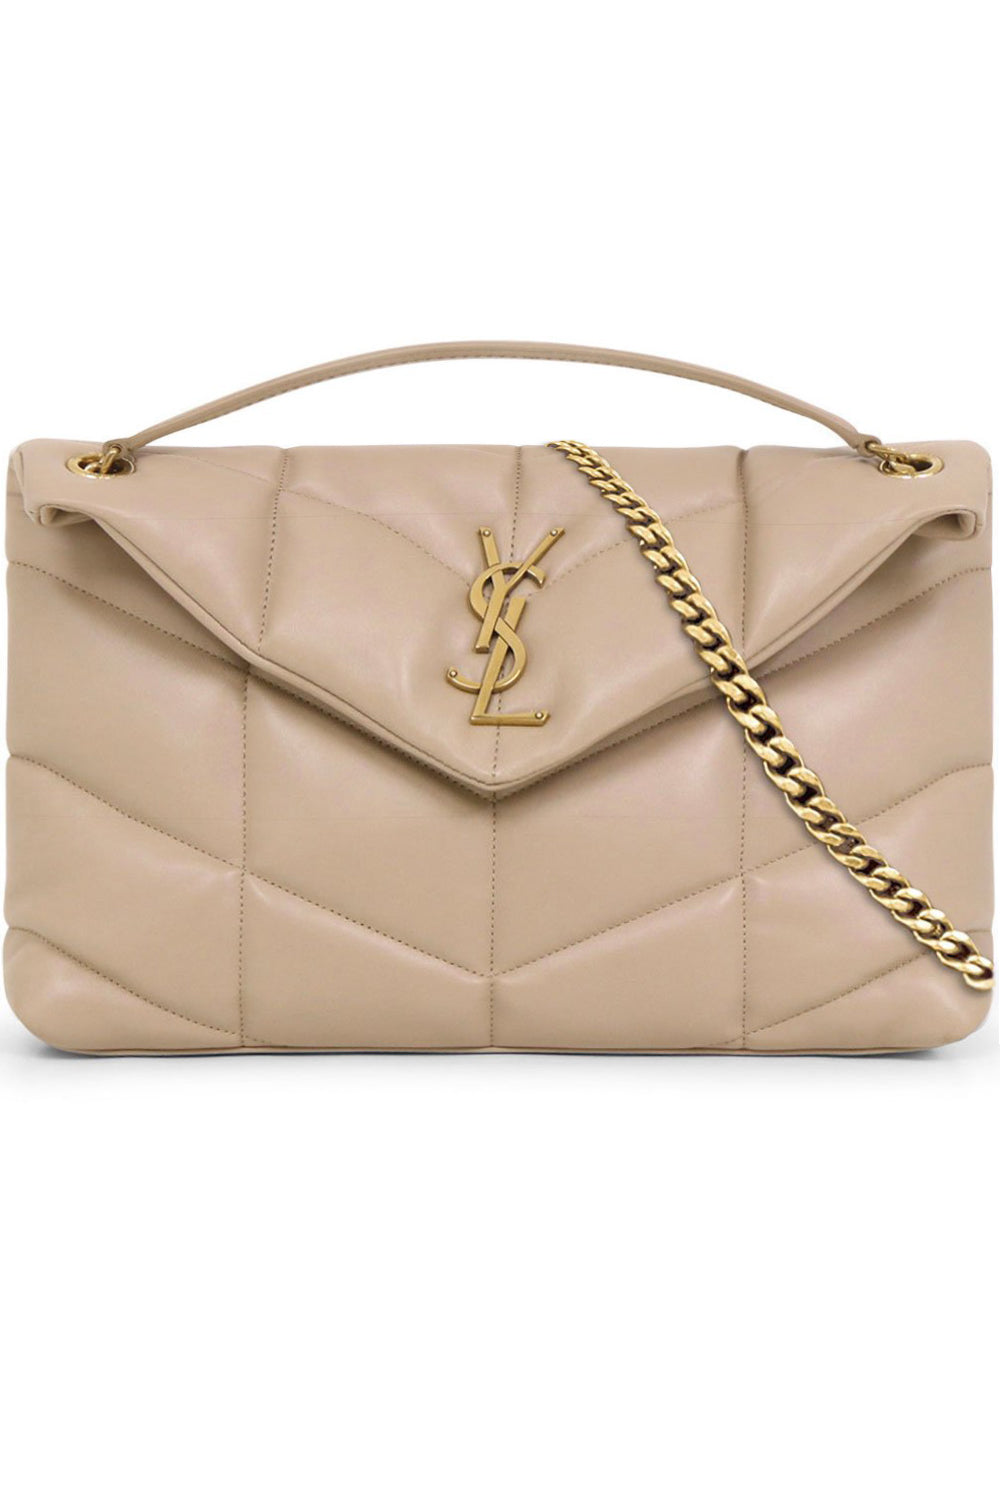 Saint Laurent White Loulou Puffer Toy leather bag